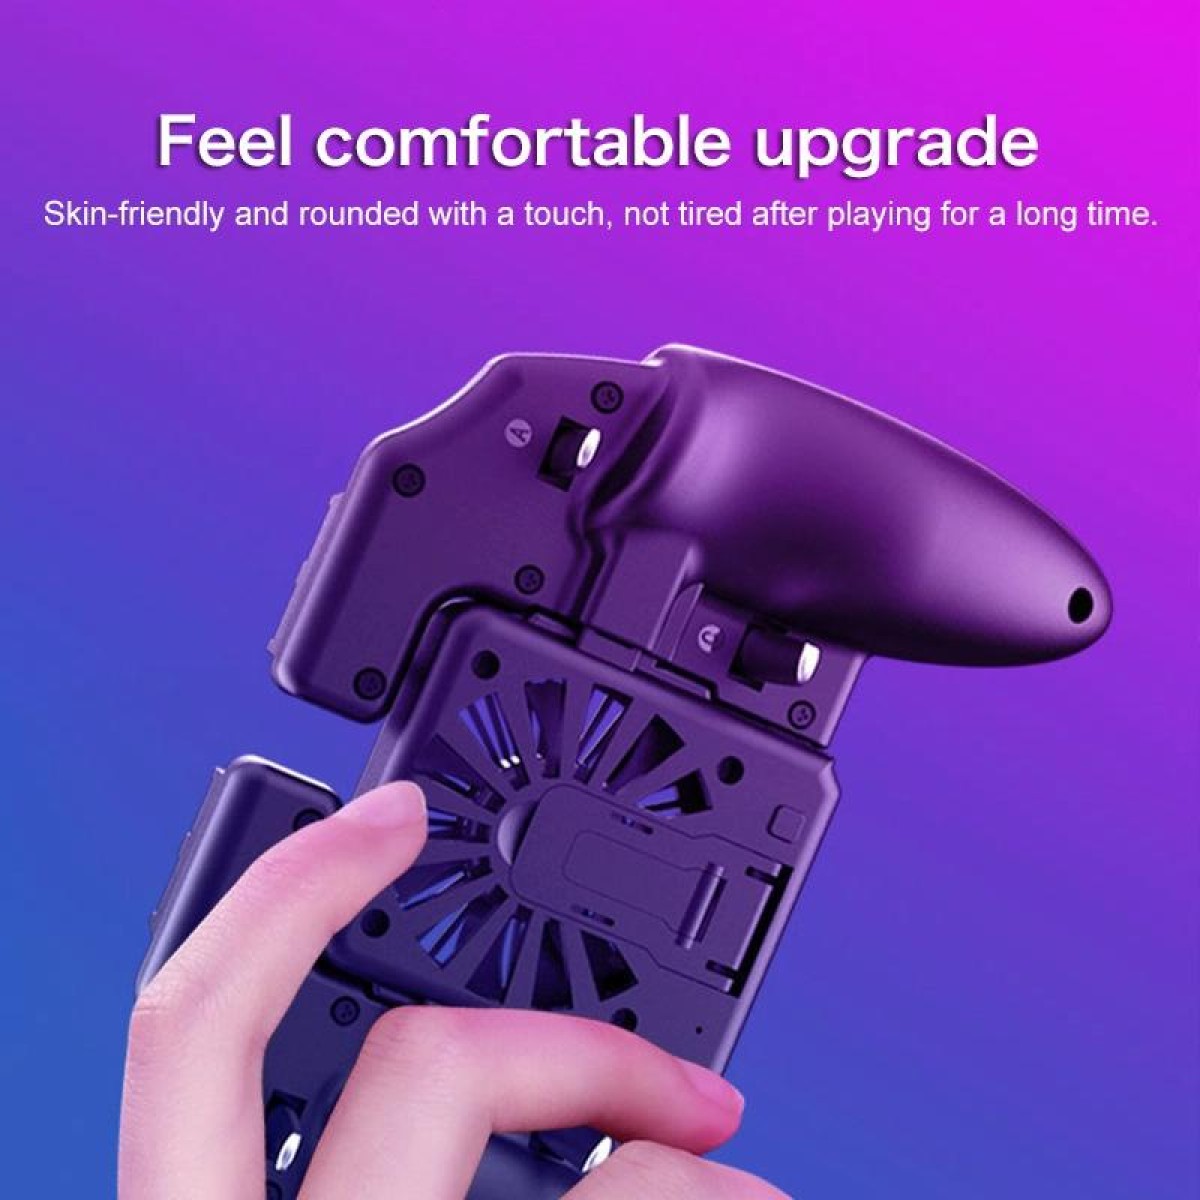 K21 Six-finger Linkage Multi-function Mobile Phone Gamepad with Bracket, Suitable for 4.7-6.5 inch Mobile Phones